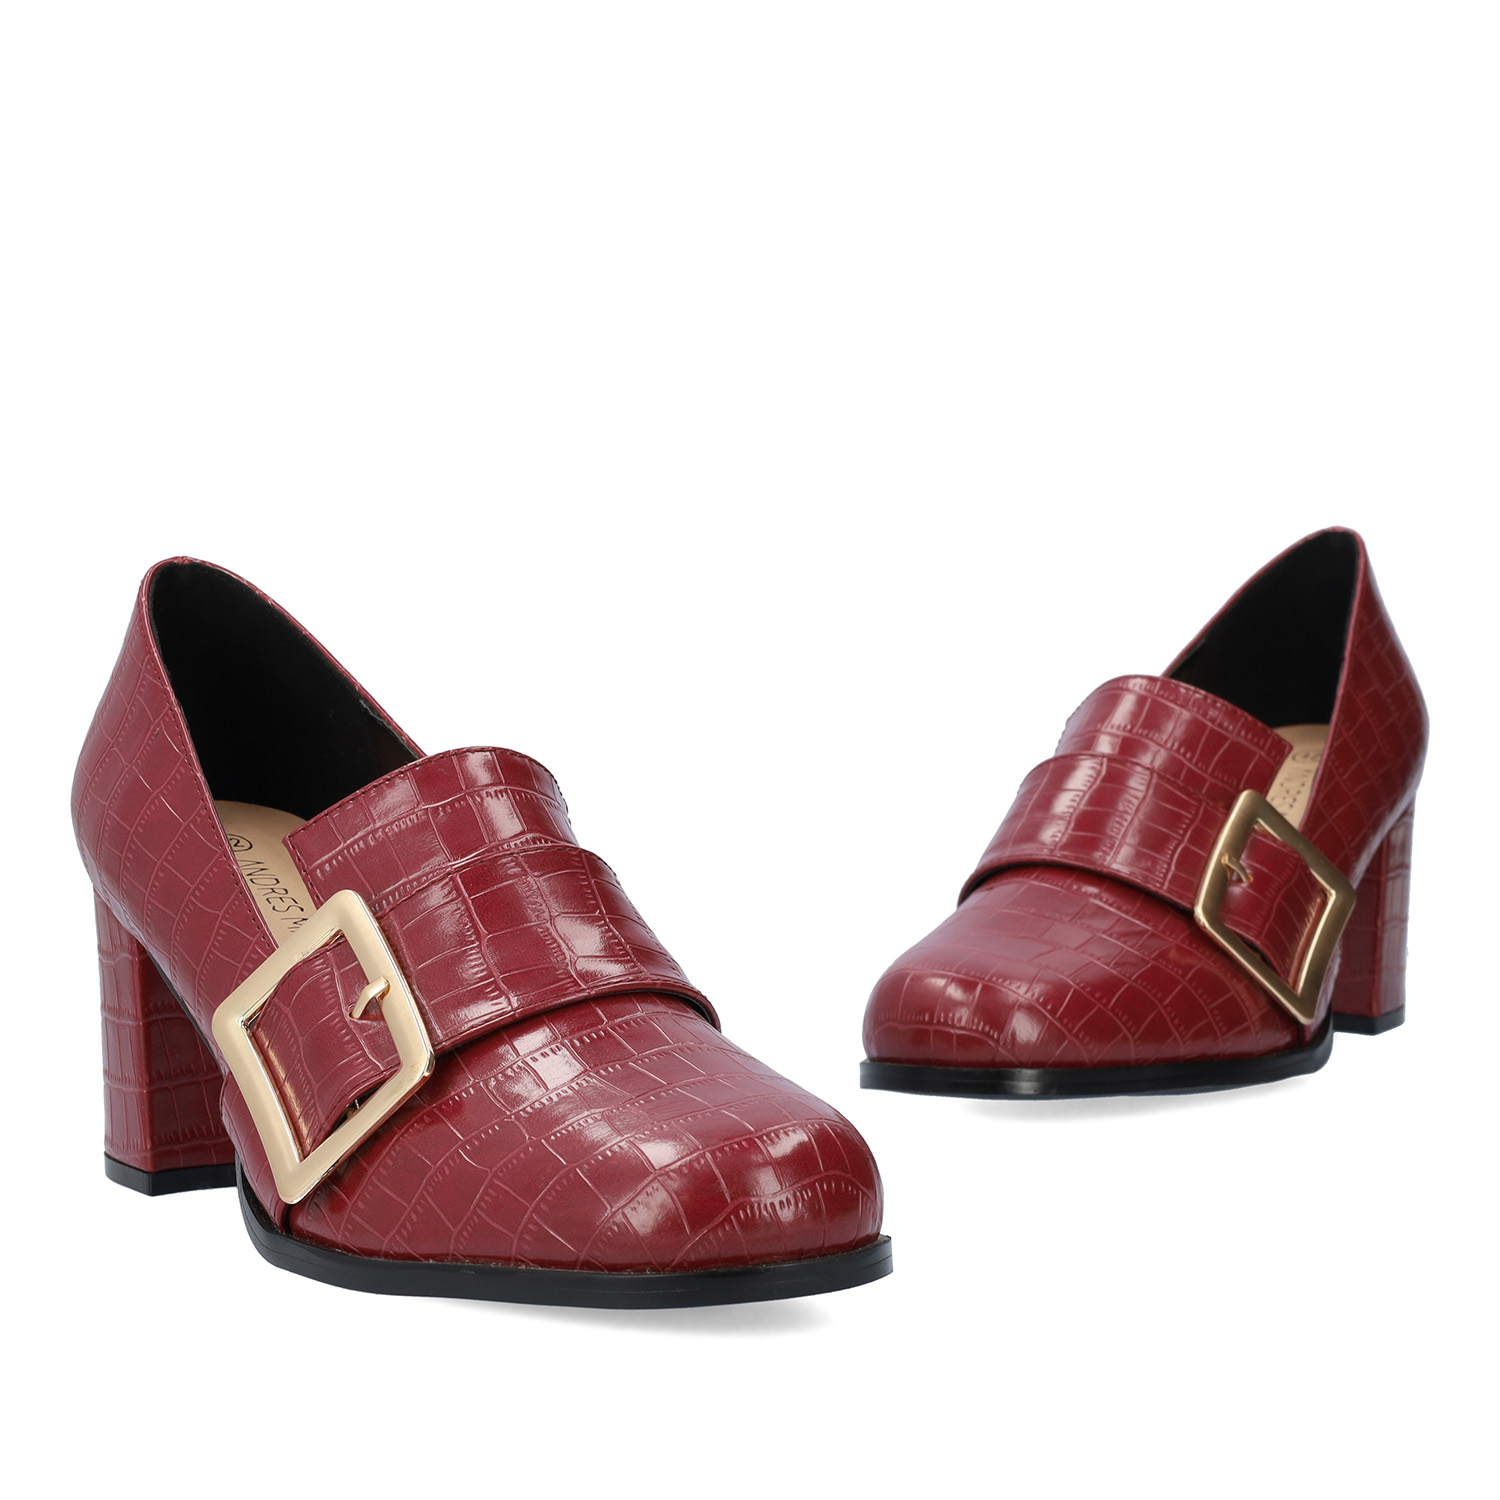 Heeled moccasins in burgundy faux croc leather and buckle detail 